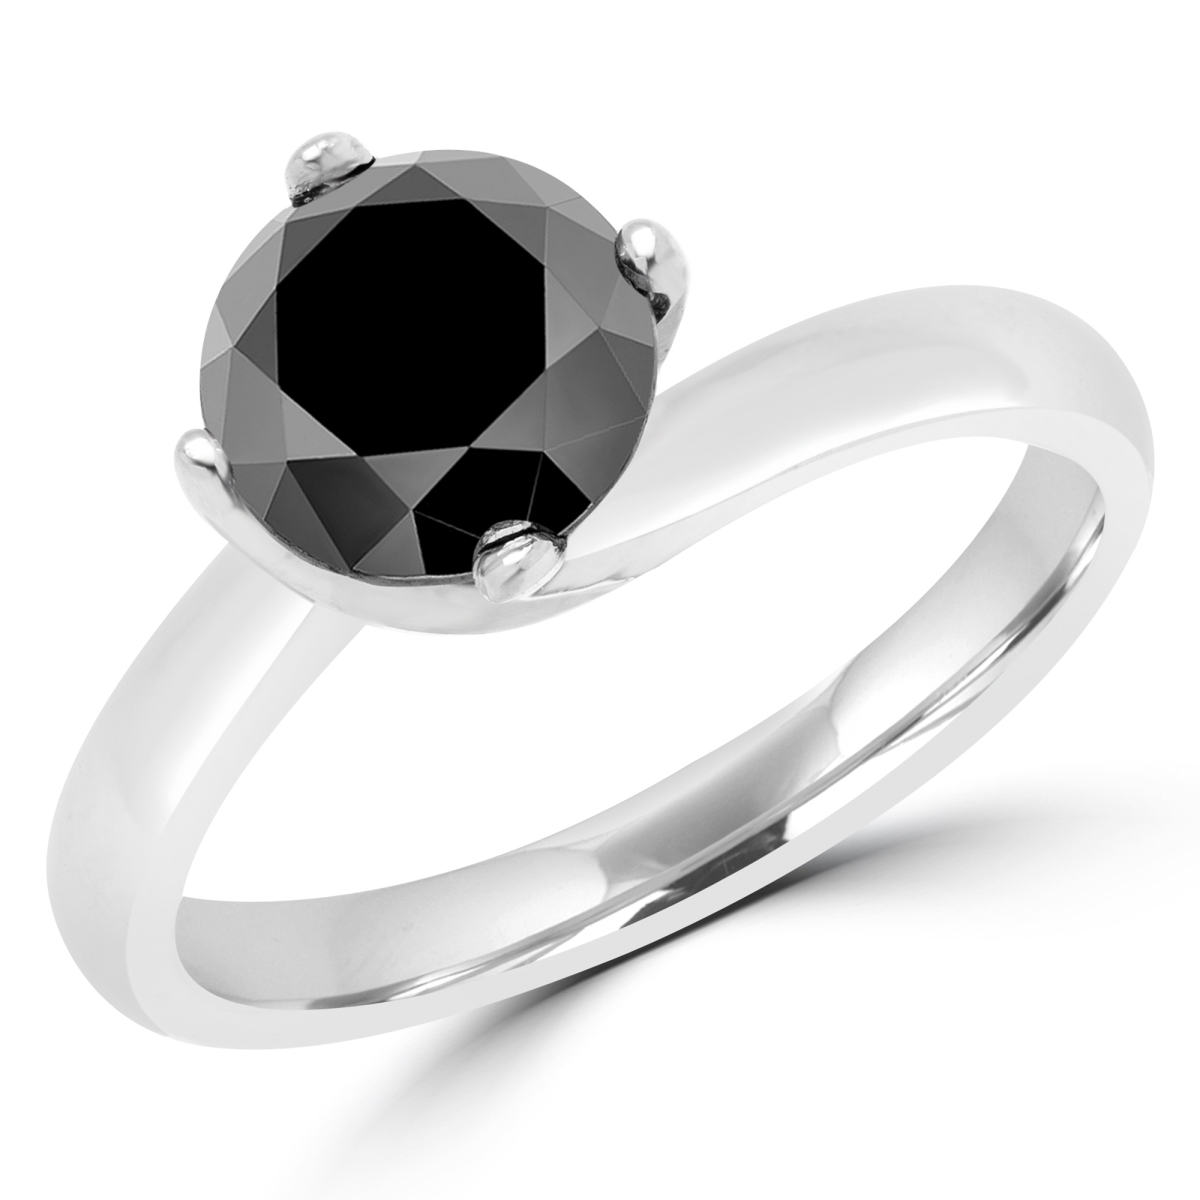 Picture of Majesty Diamonds MD180258-P 2.1 CT Round Black Diamond Solitaire Engagement Ring in 10K White Gold